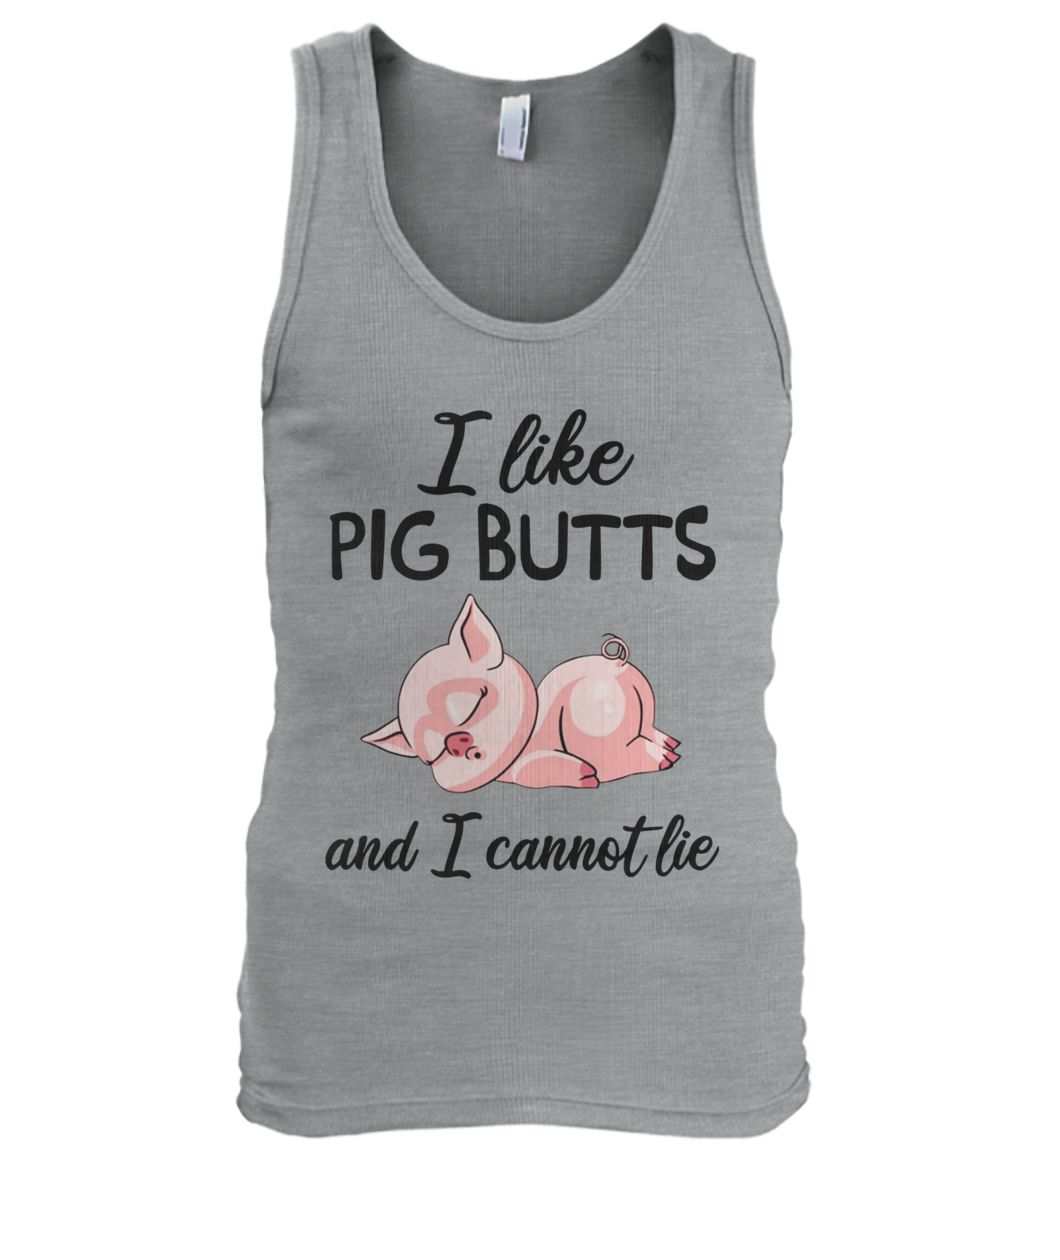 I like pig butts and I cannot lie men's tank top